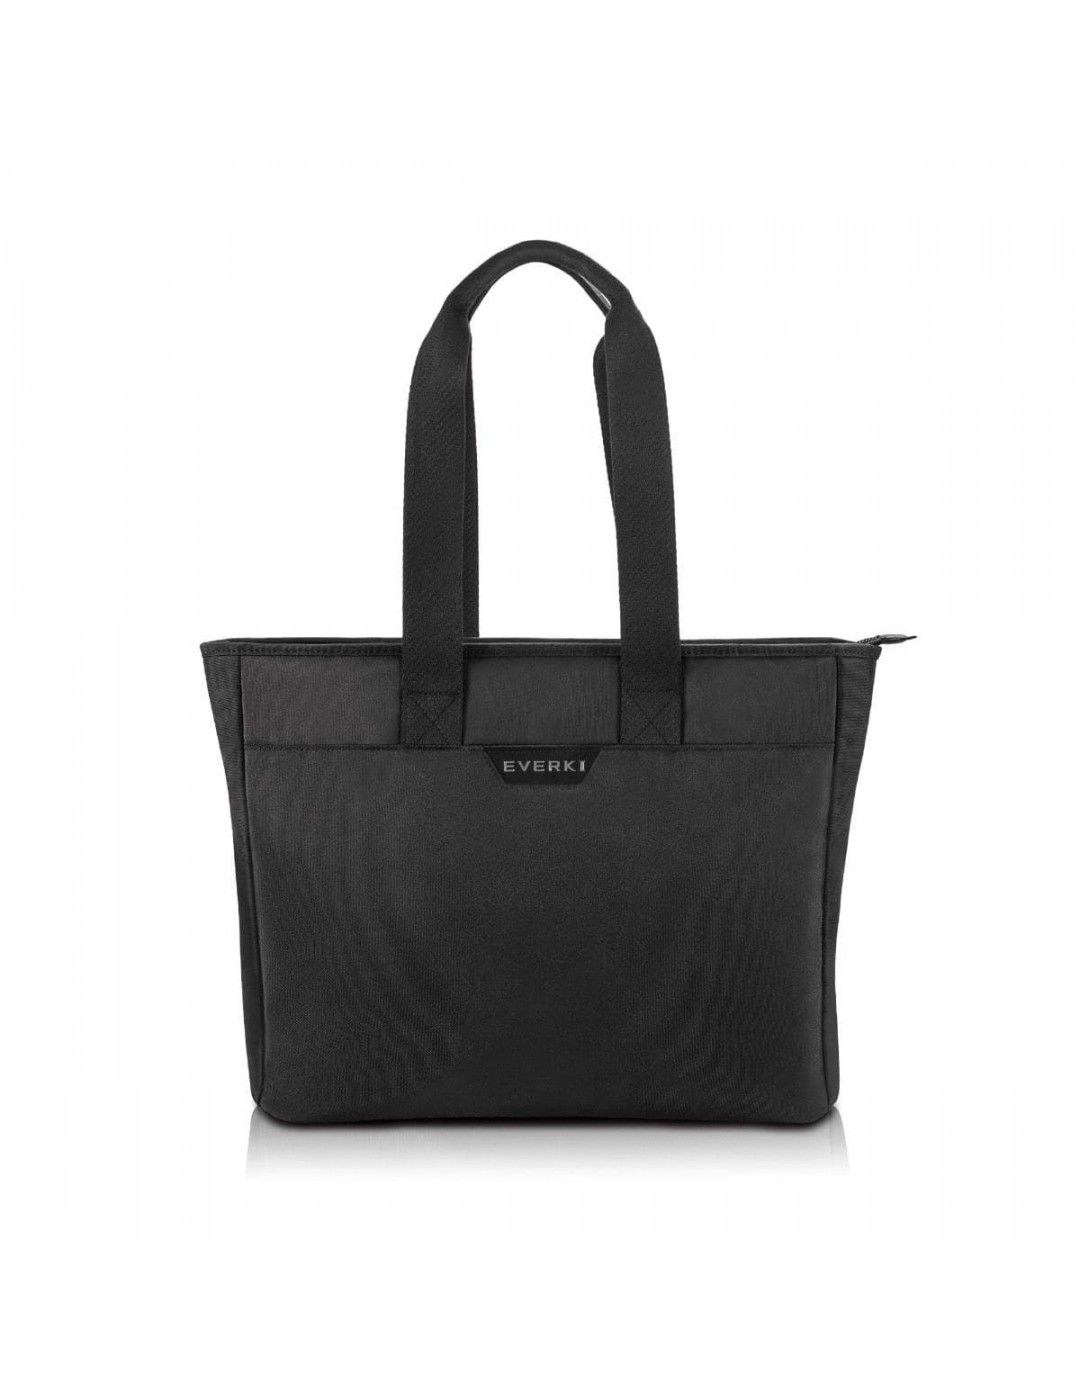 Everki handbag with laptop compartment 15.6 inches